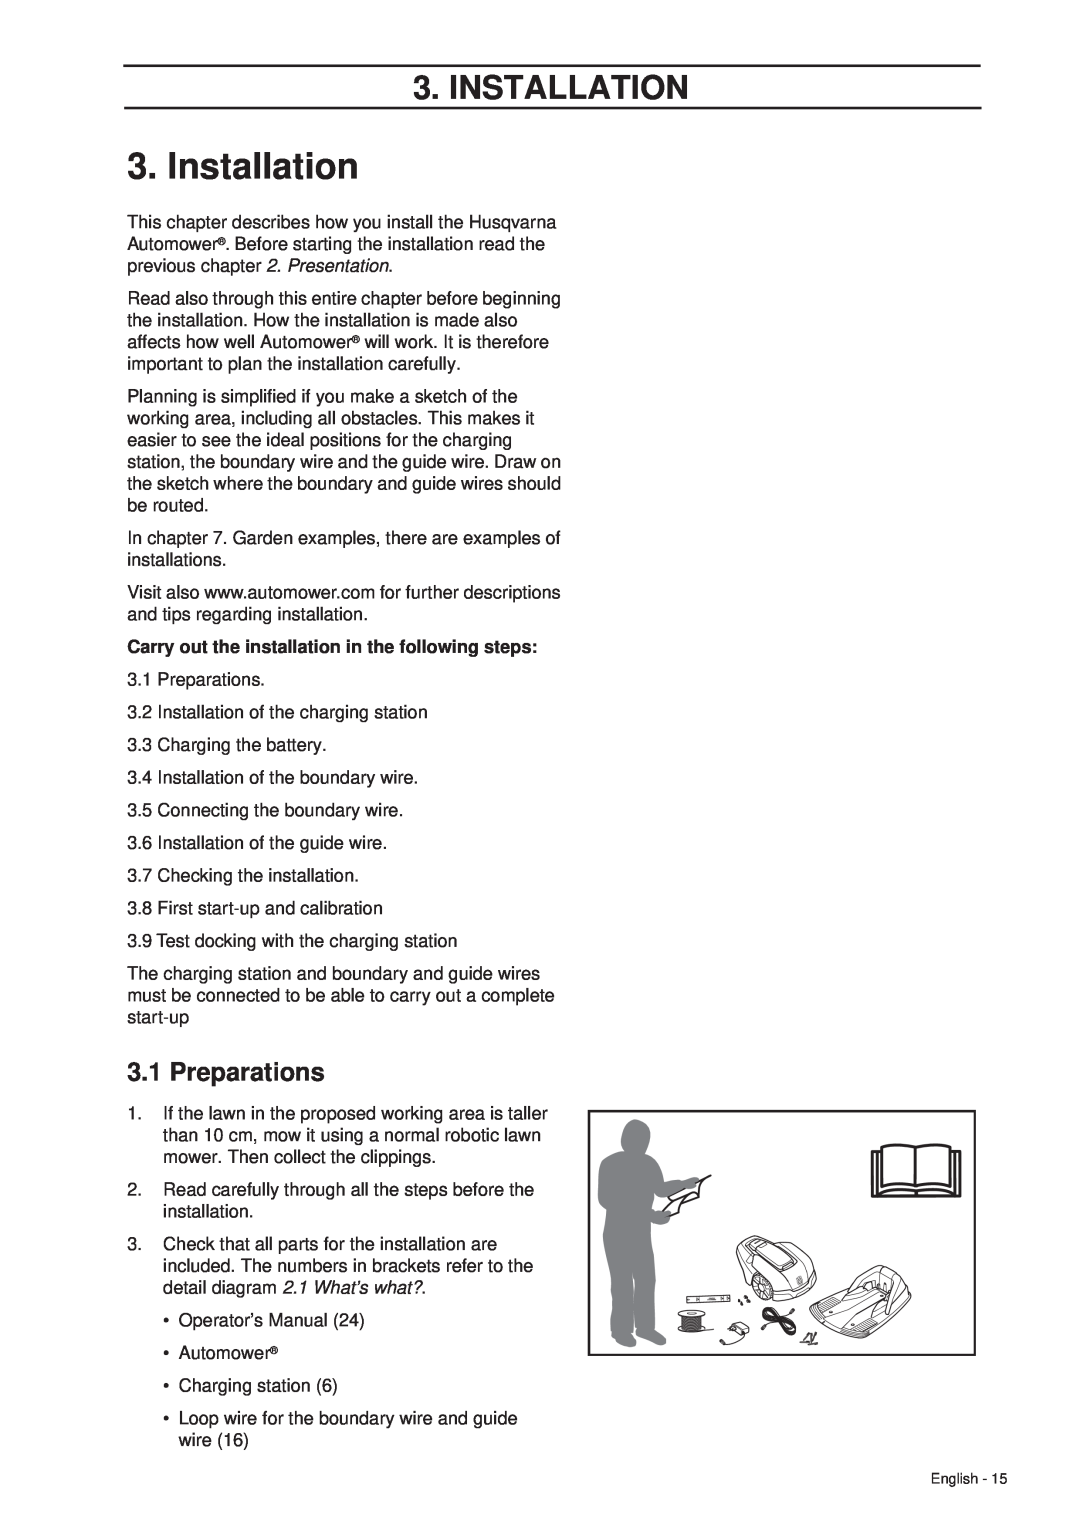 Husqvarna 305 manual Installation, Preparations, Carry out the installation in the following steps 